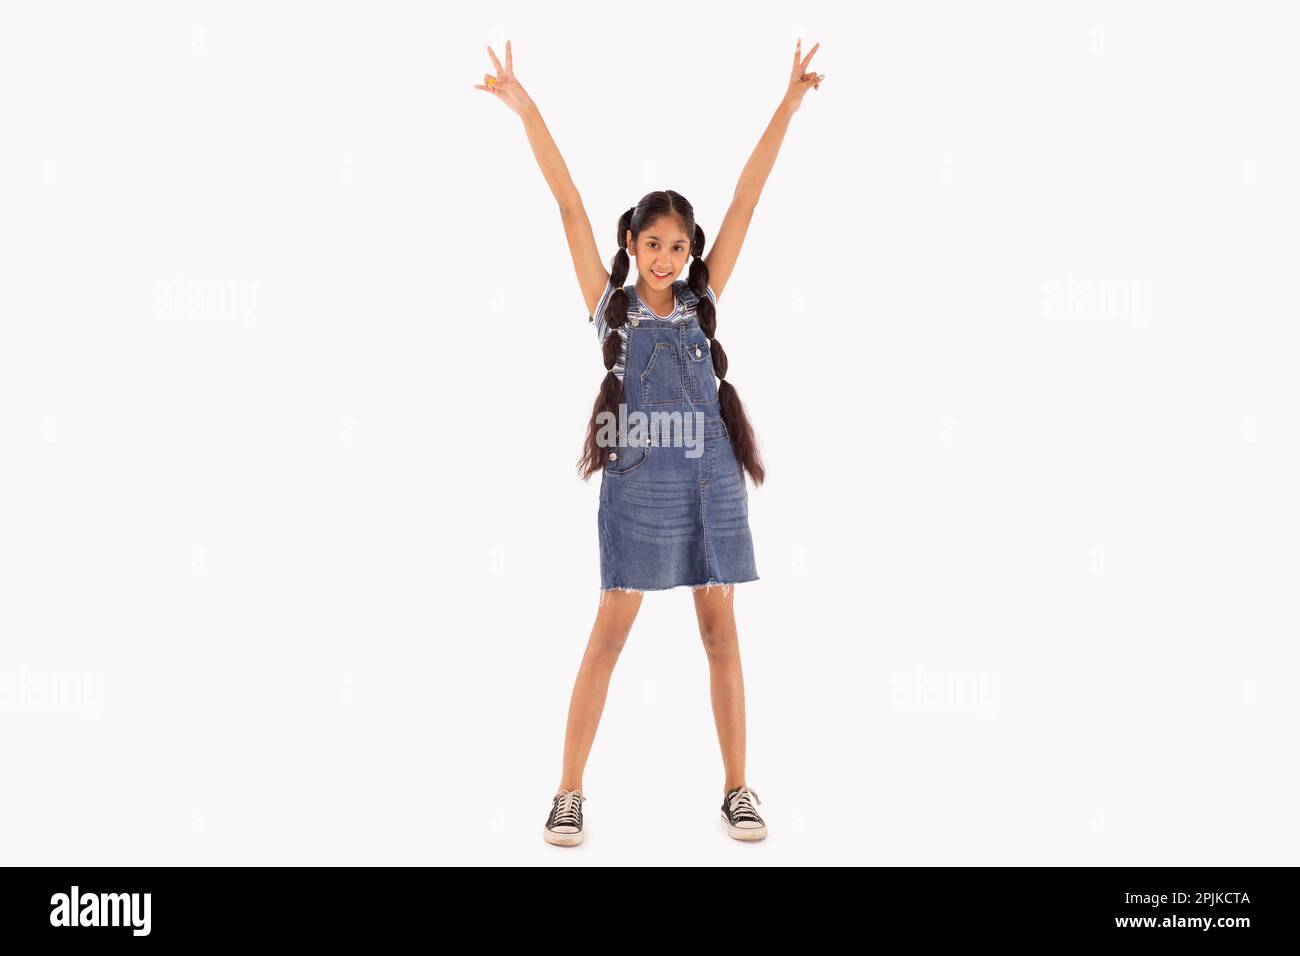 Tween girl with braided hair gesturing with hands up against white background Stock Photo